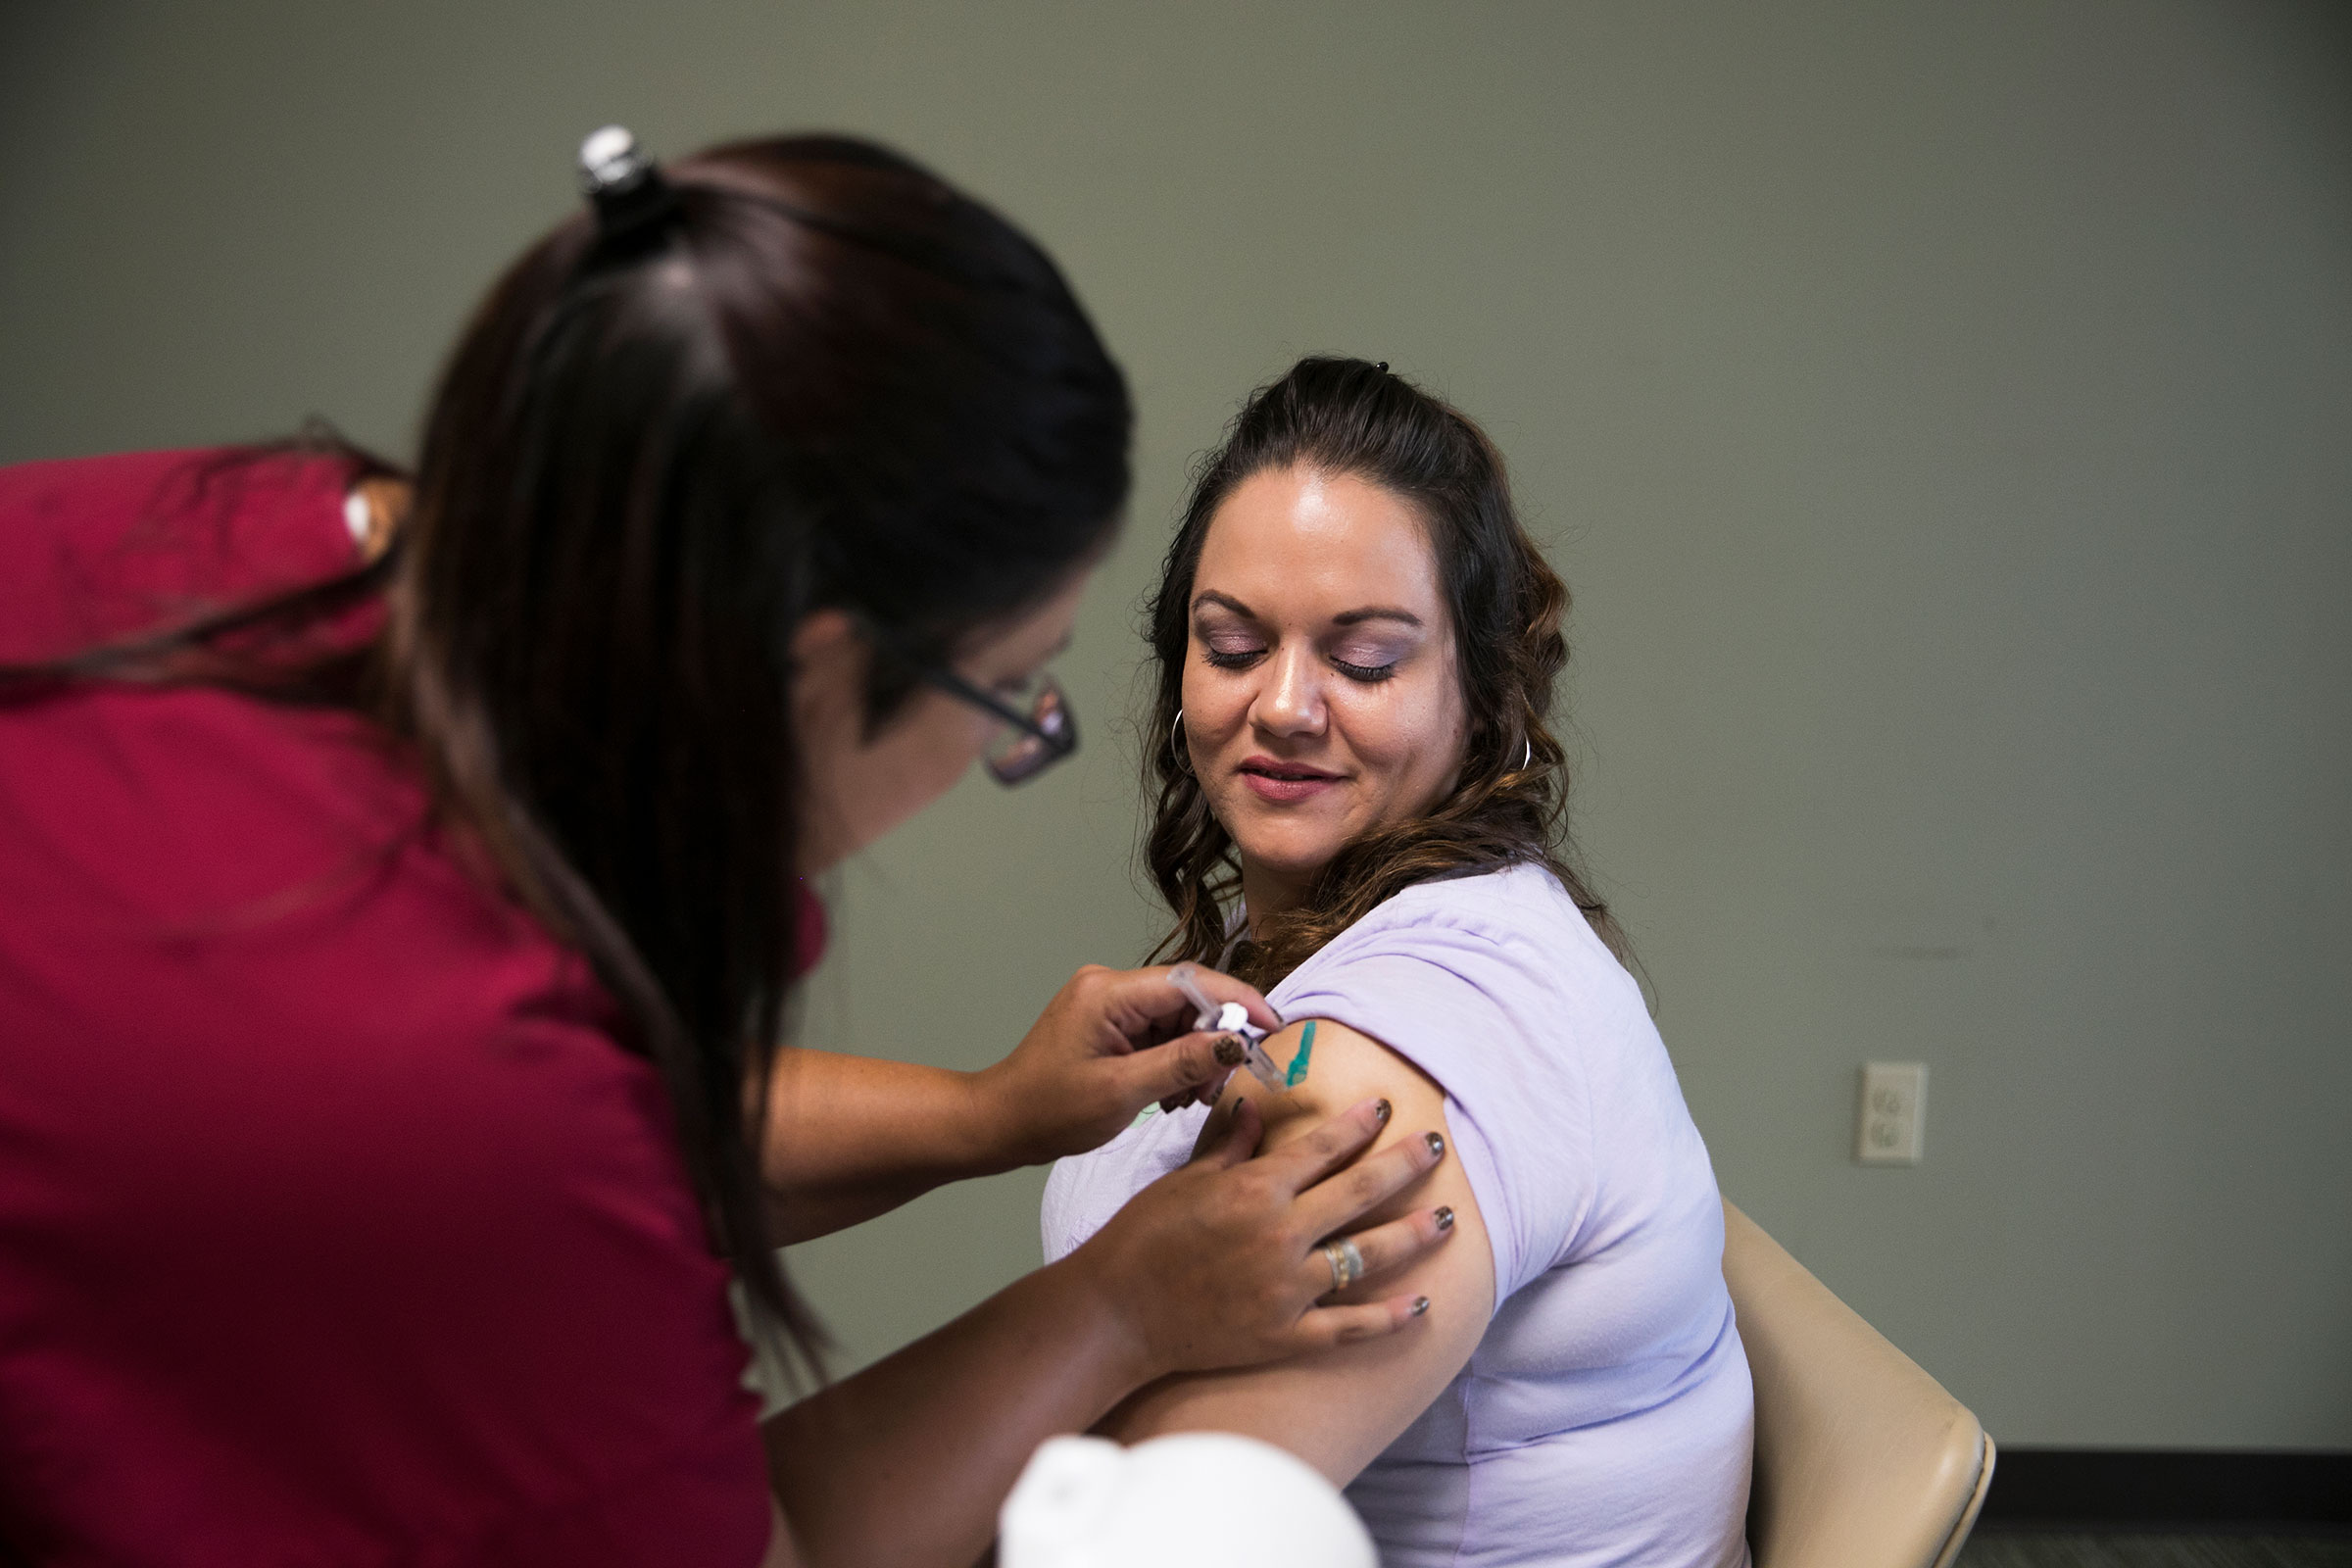 Jessica Gilbert, 33, got her second dose of hepatitis A vaccine during a South Street Ministries program in Akron, Ohio, on July 23. She’d had her first in late May, providing most of her immunity. But she wanted to be extra cautious because she believes she may have been exposed by another woman in jail in a nearby county.